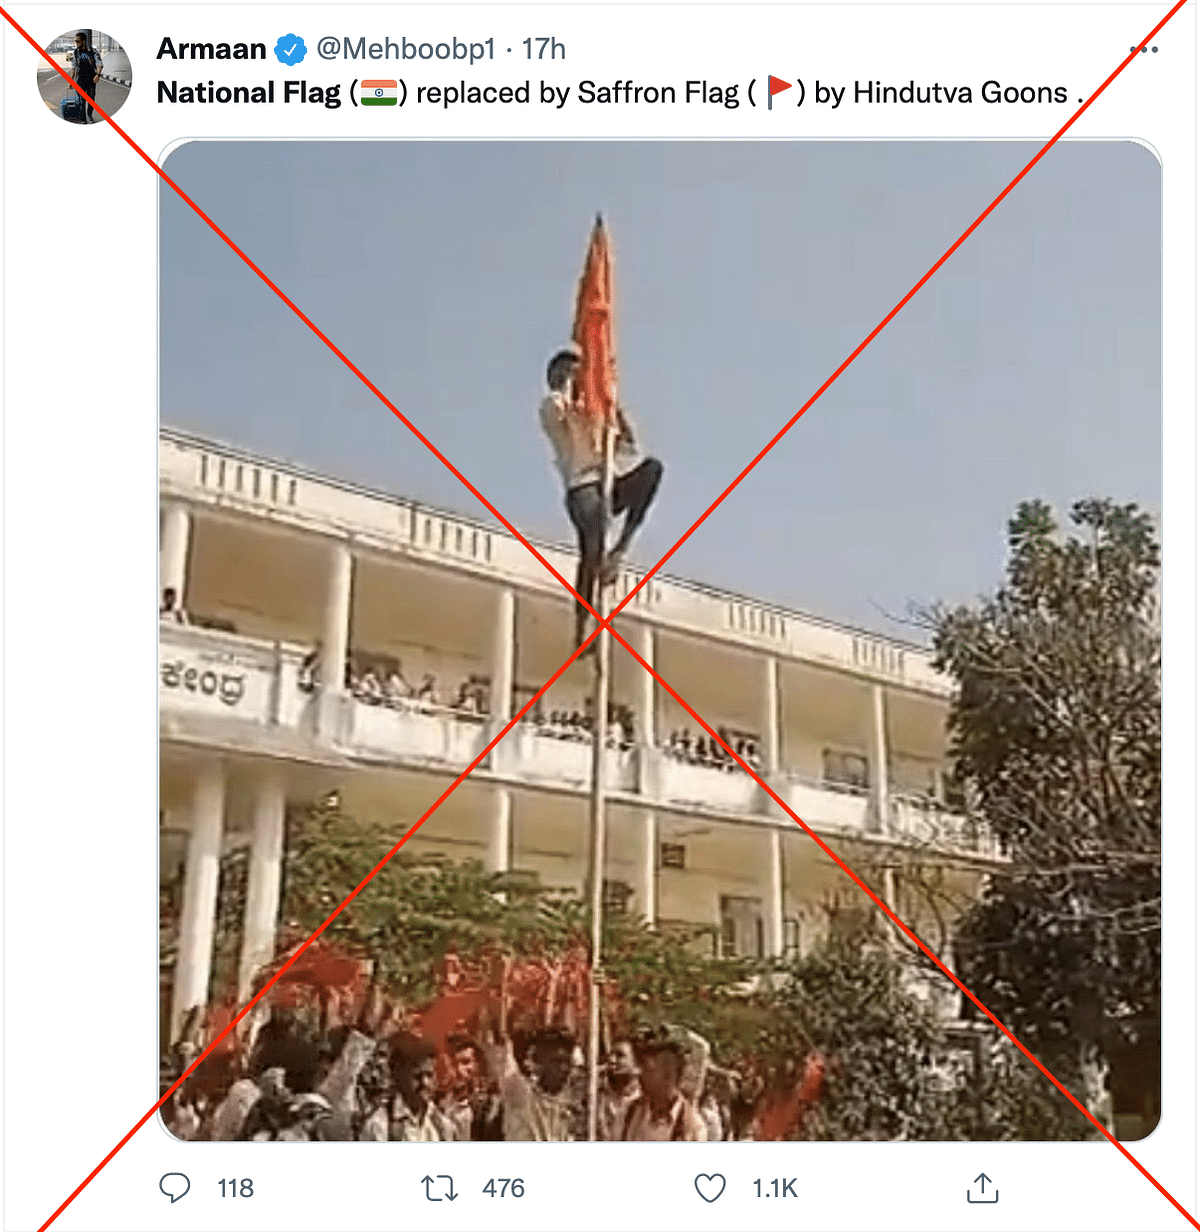 The principal of the college confirmed that the pole was empty when the saffron flag was hoisted.